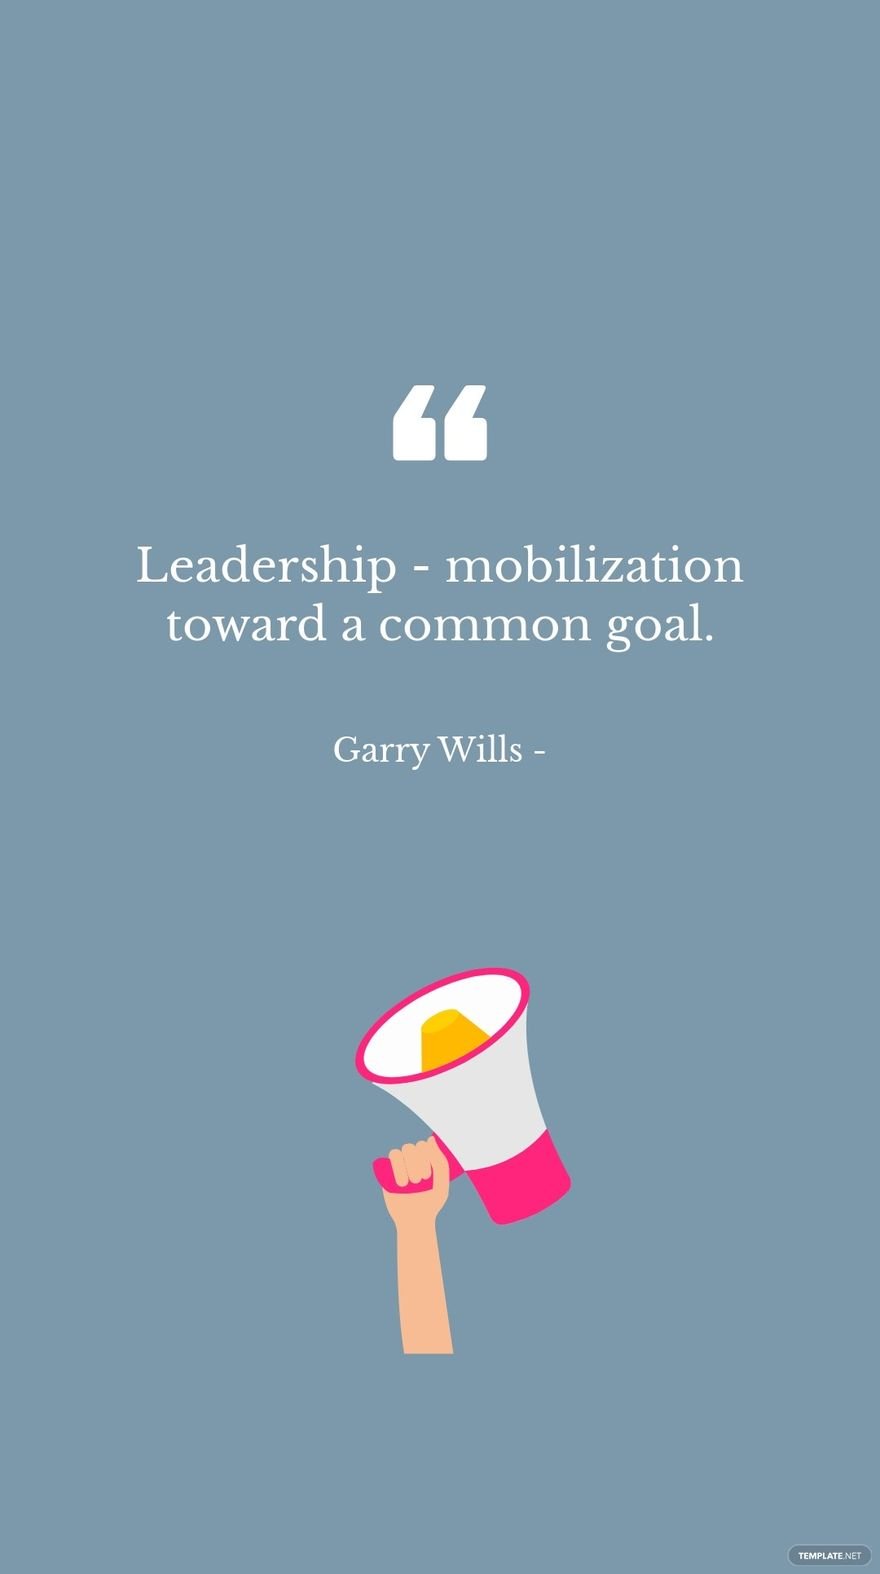 Garry Wills - Leadership - mobilization toward a common goal.